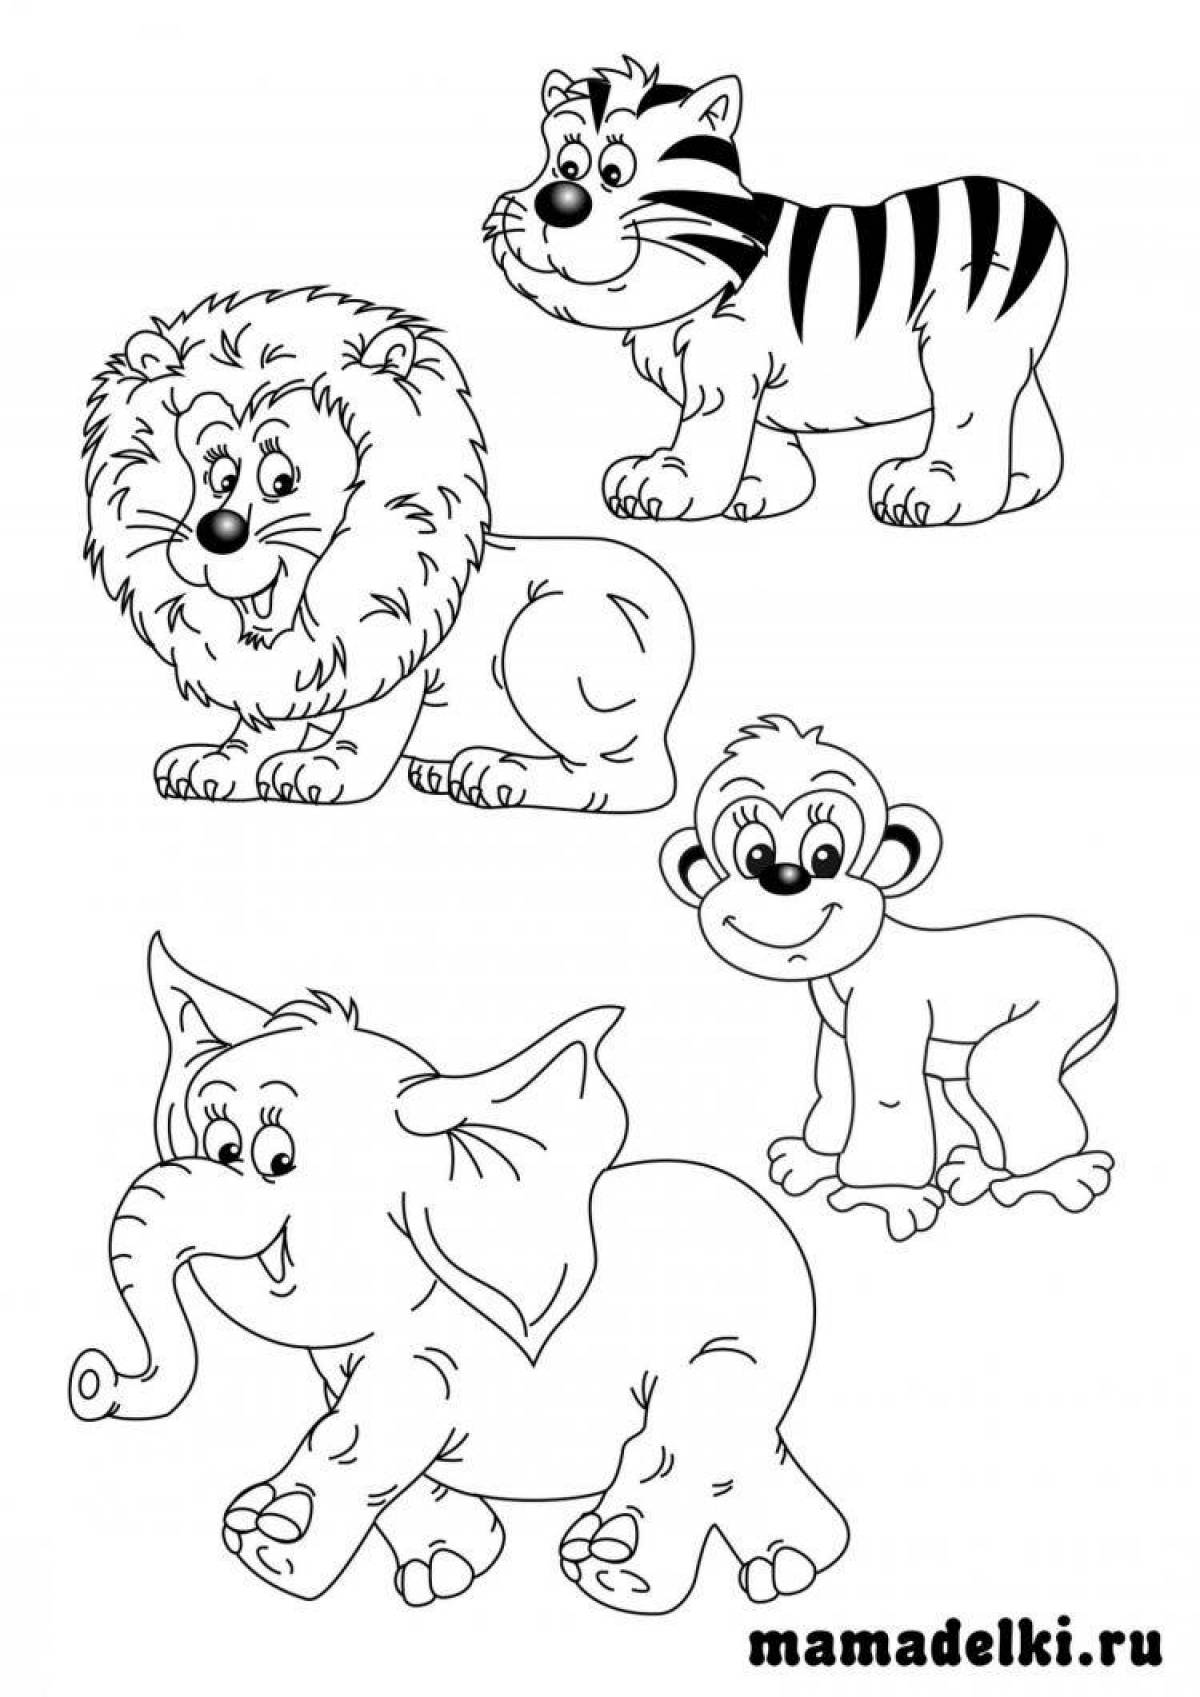 Creative wild animal coloring book for 5-6 year olds